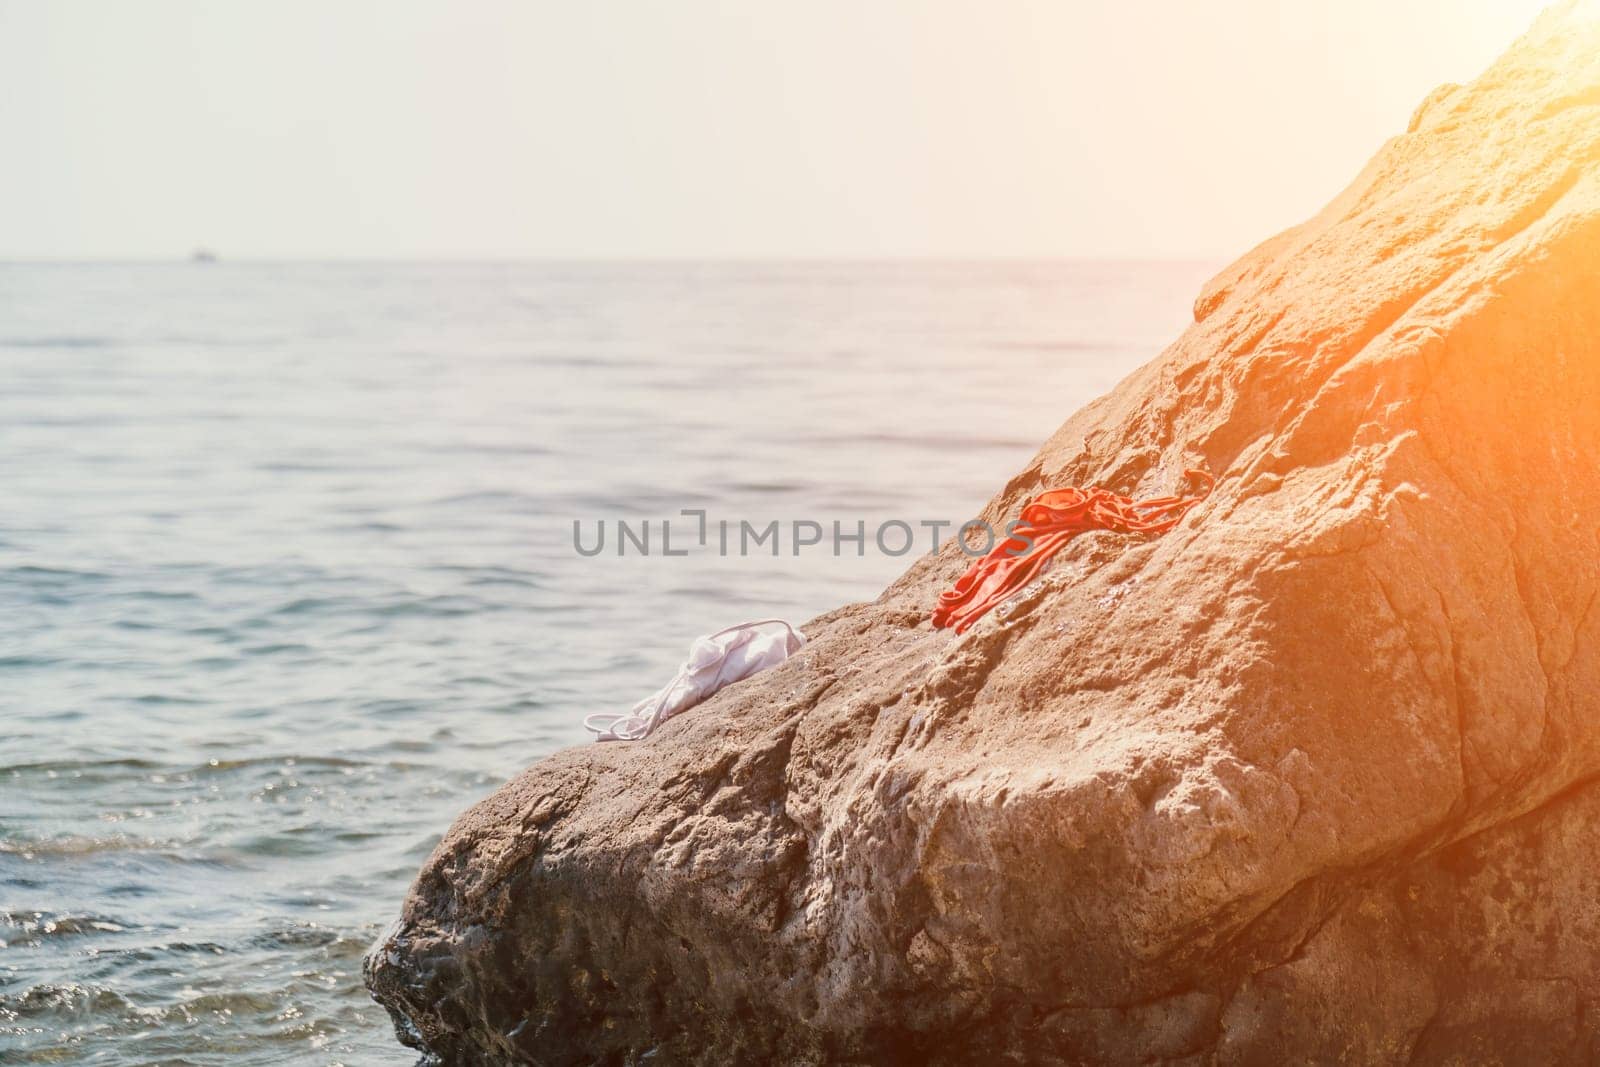 Woman summer sea. Happy woman swimming with inflatable donut on the beach in summer sunny day, surrounded by volcanic mountains. Summer vacation concept